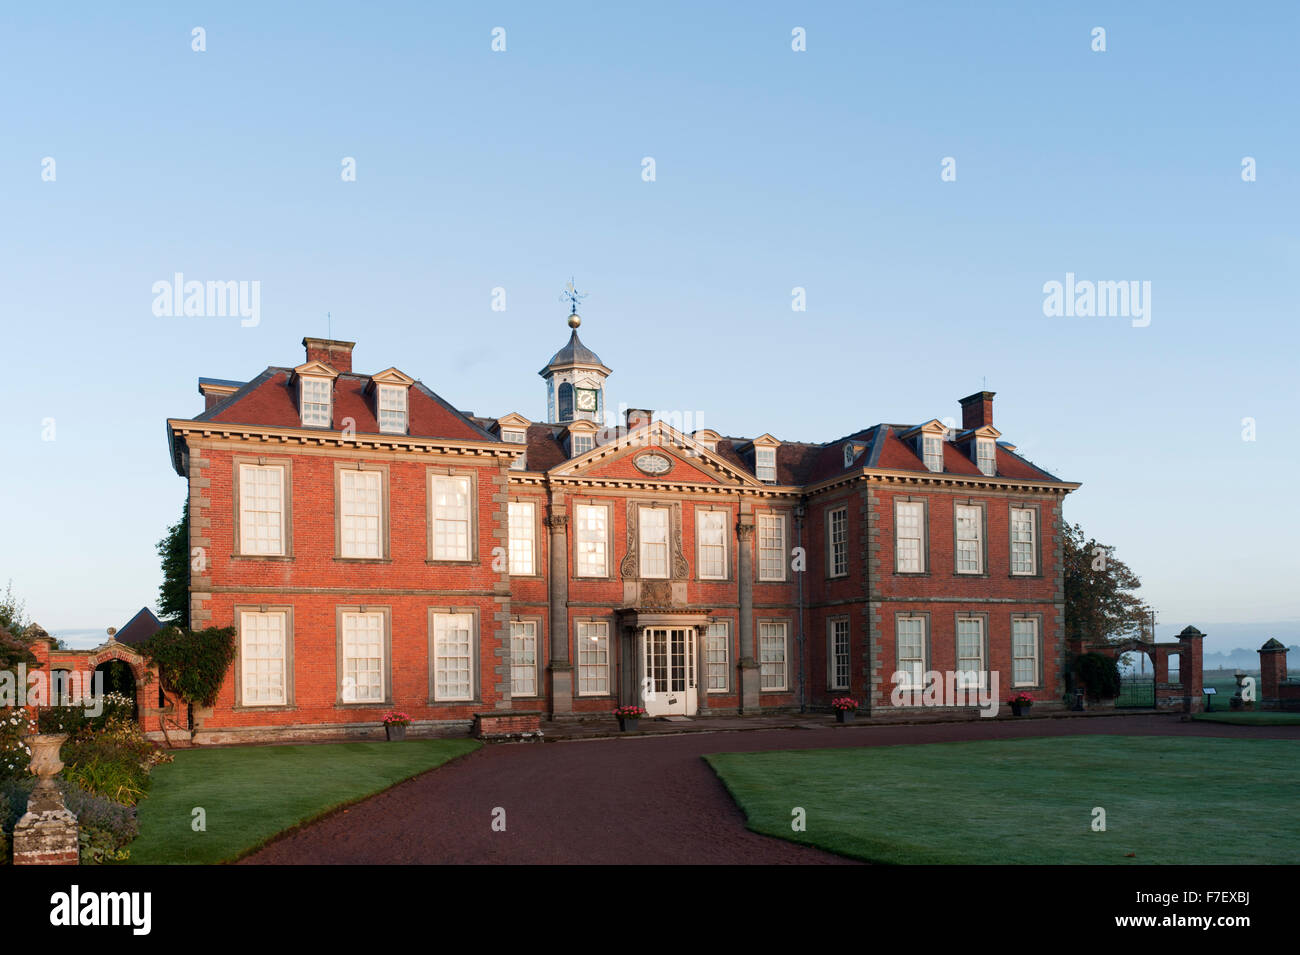 Hanbury Hall near Droitwich Spa West Midlands Worcestershire England UK Europe Stock Photo